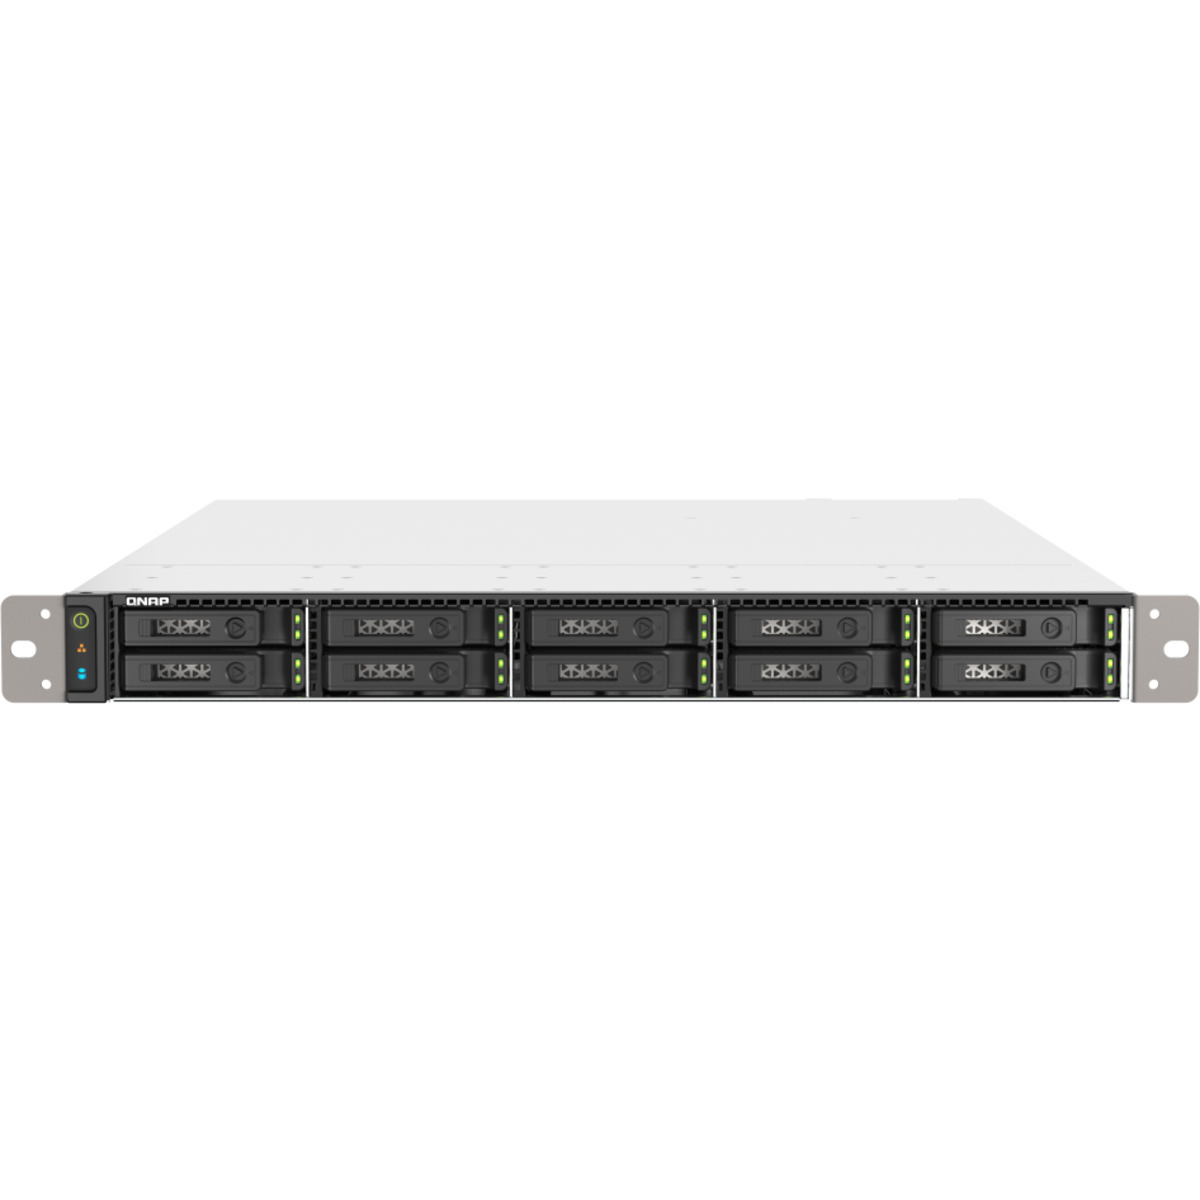 QNAP TS-h1090FU-7232P 5tb 10-Bay RackMount Large Business / Enterprise NAS - Network Attached Storage Device 10x500gb Sabrent Rocket 4 Plus SB-RKT4P-500  7000/3700MB/s M.2 2280 NVMe SSD CONSUMER Class Drives Installed - Burn-In Tested TS-h1090FU-7232P